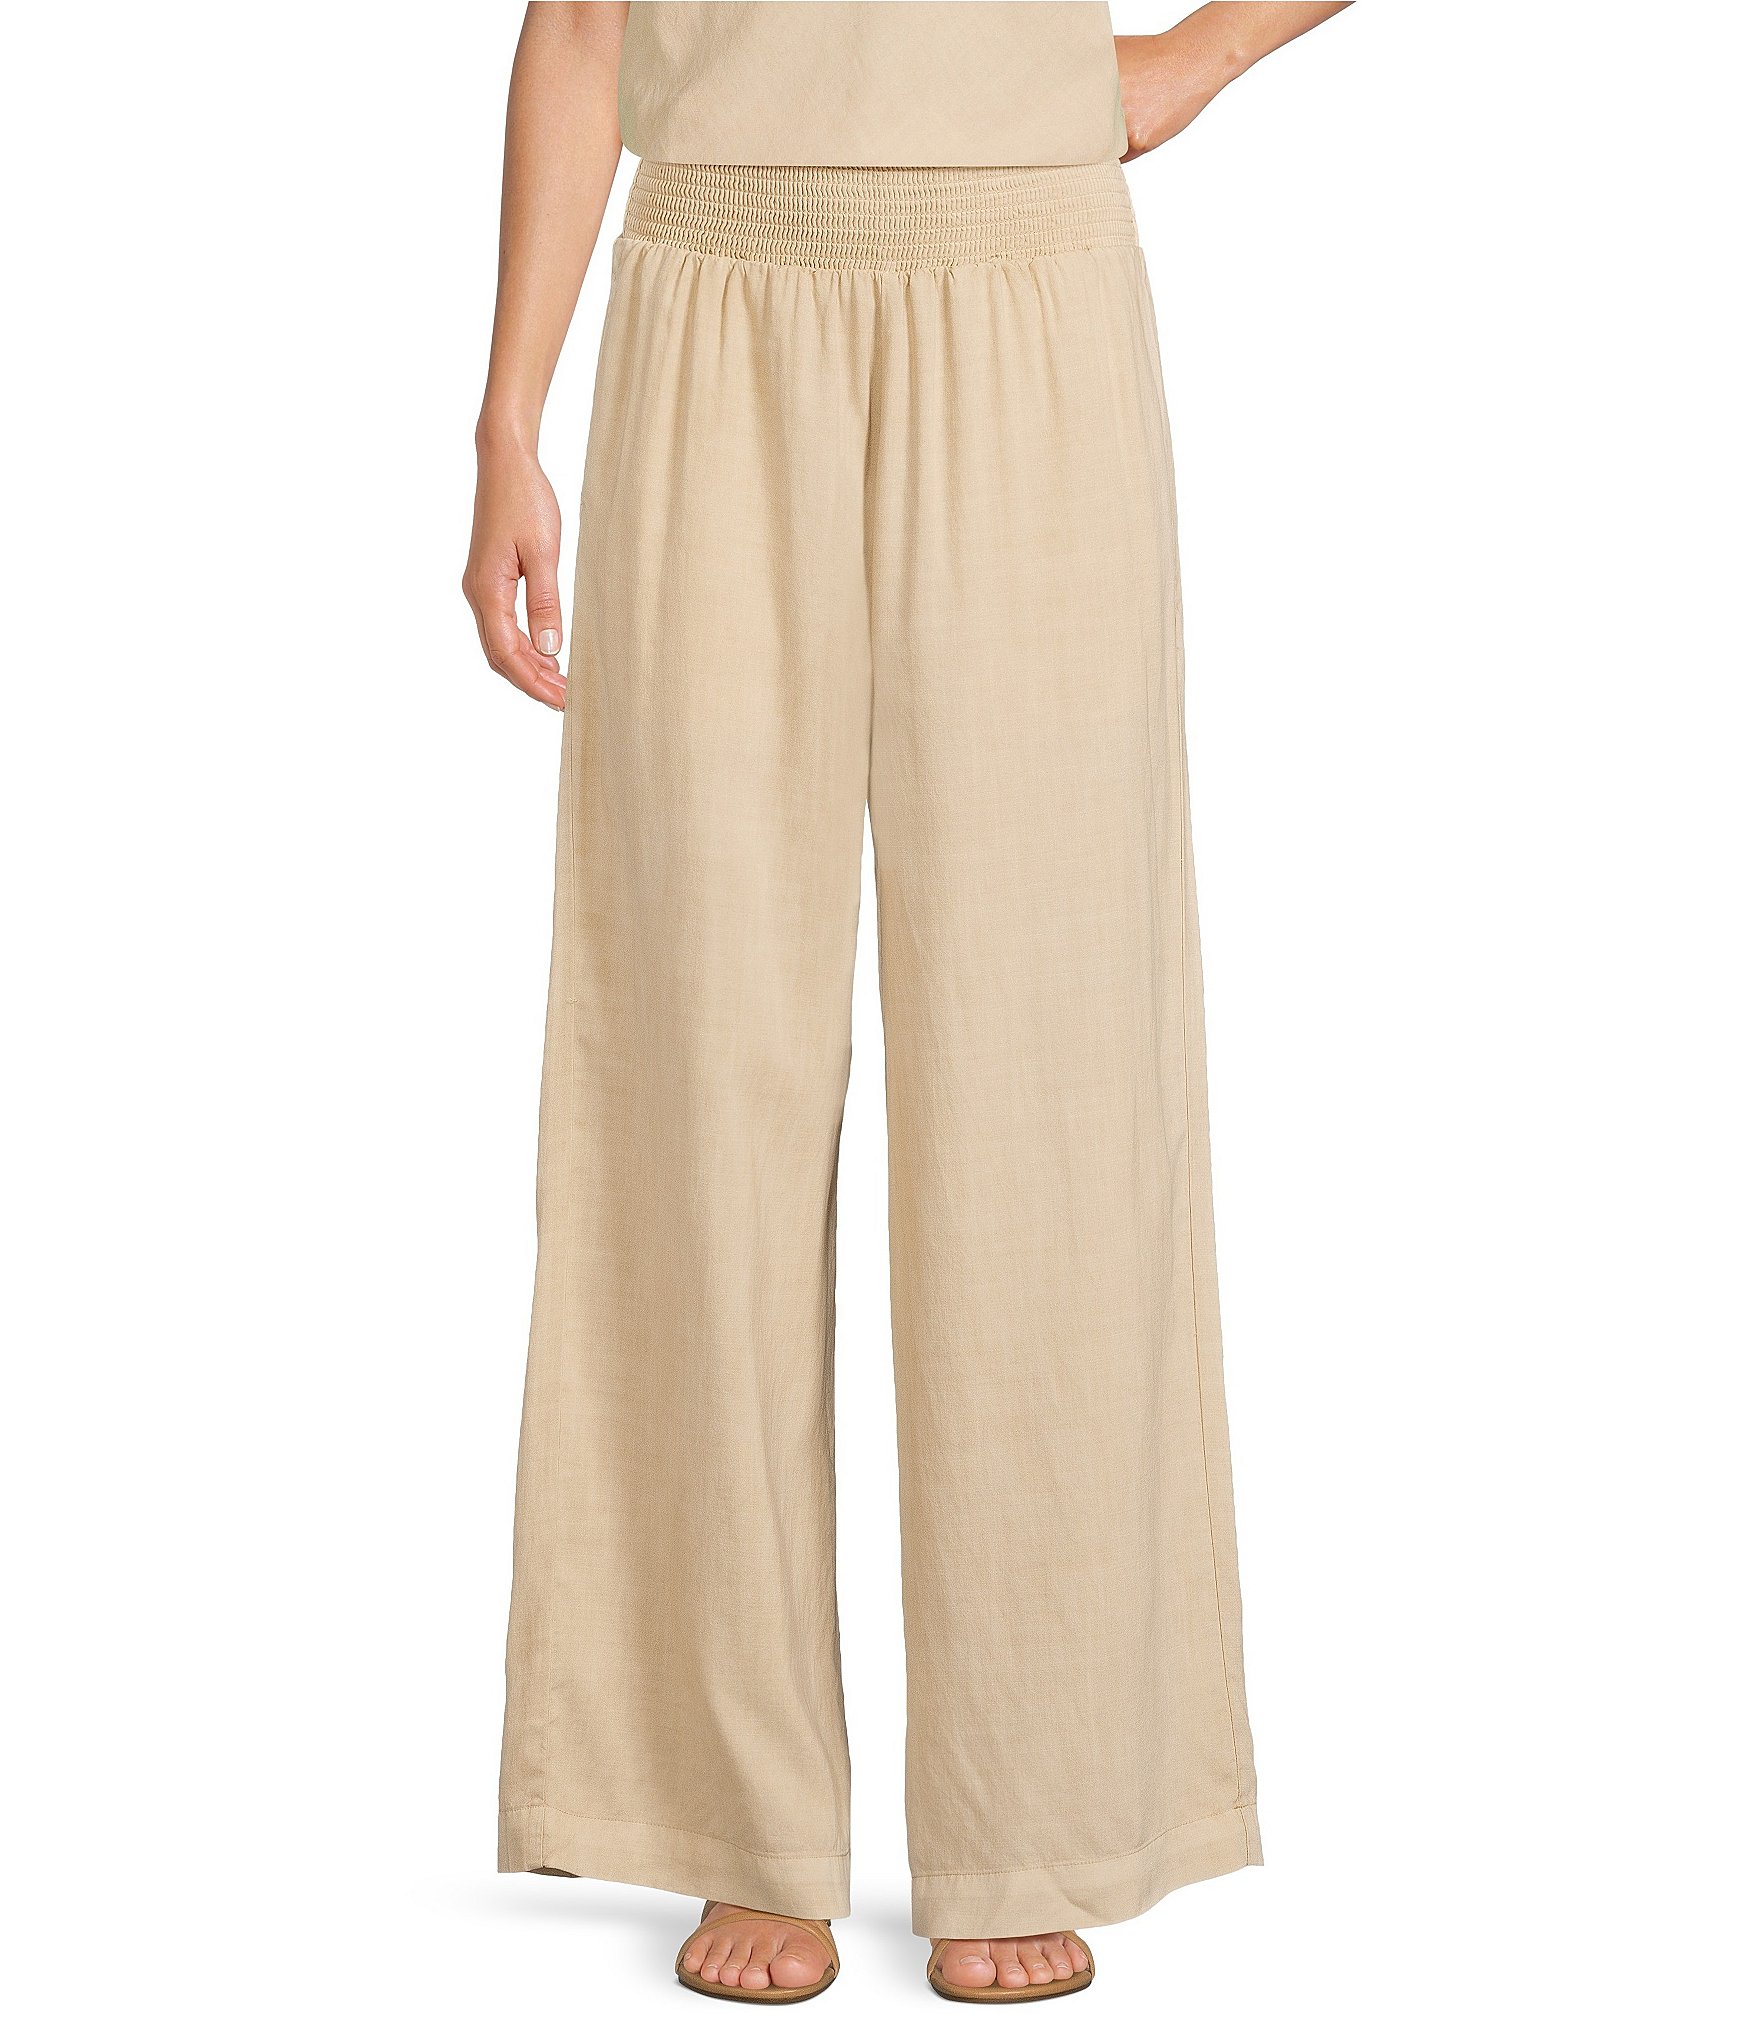 Taking a Vacation Wide Leg Smocked Pants - 4 Colors